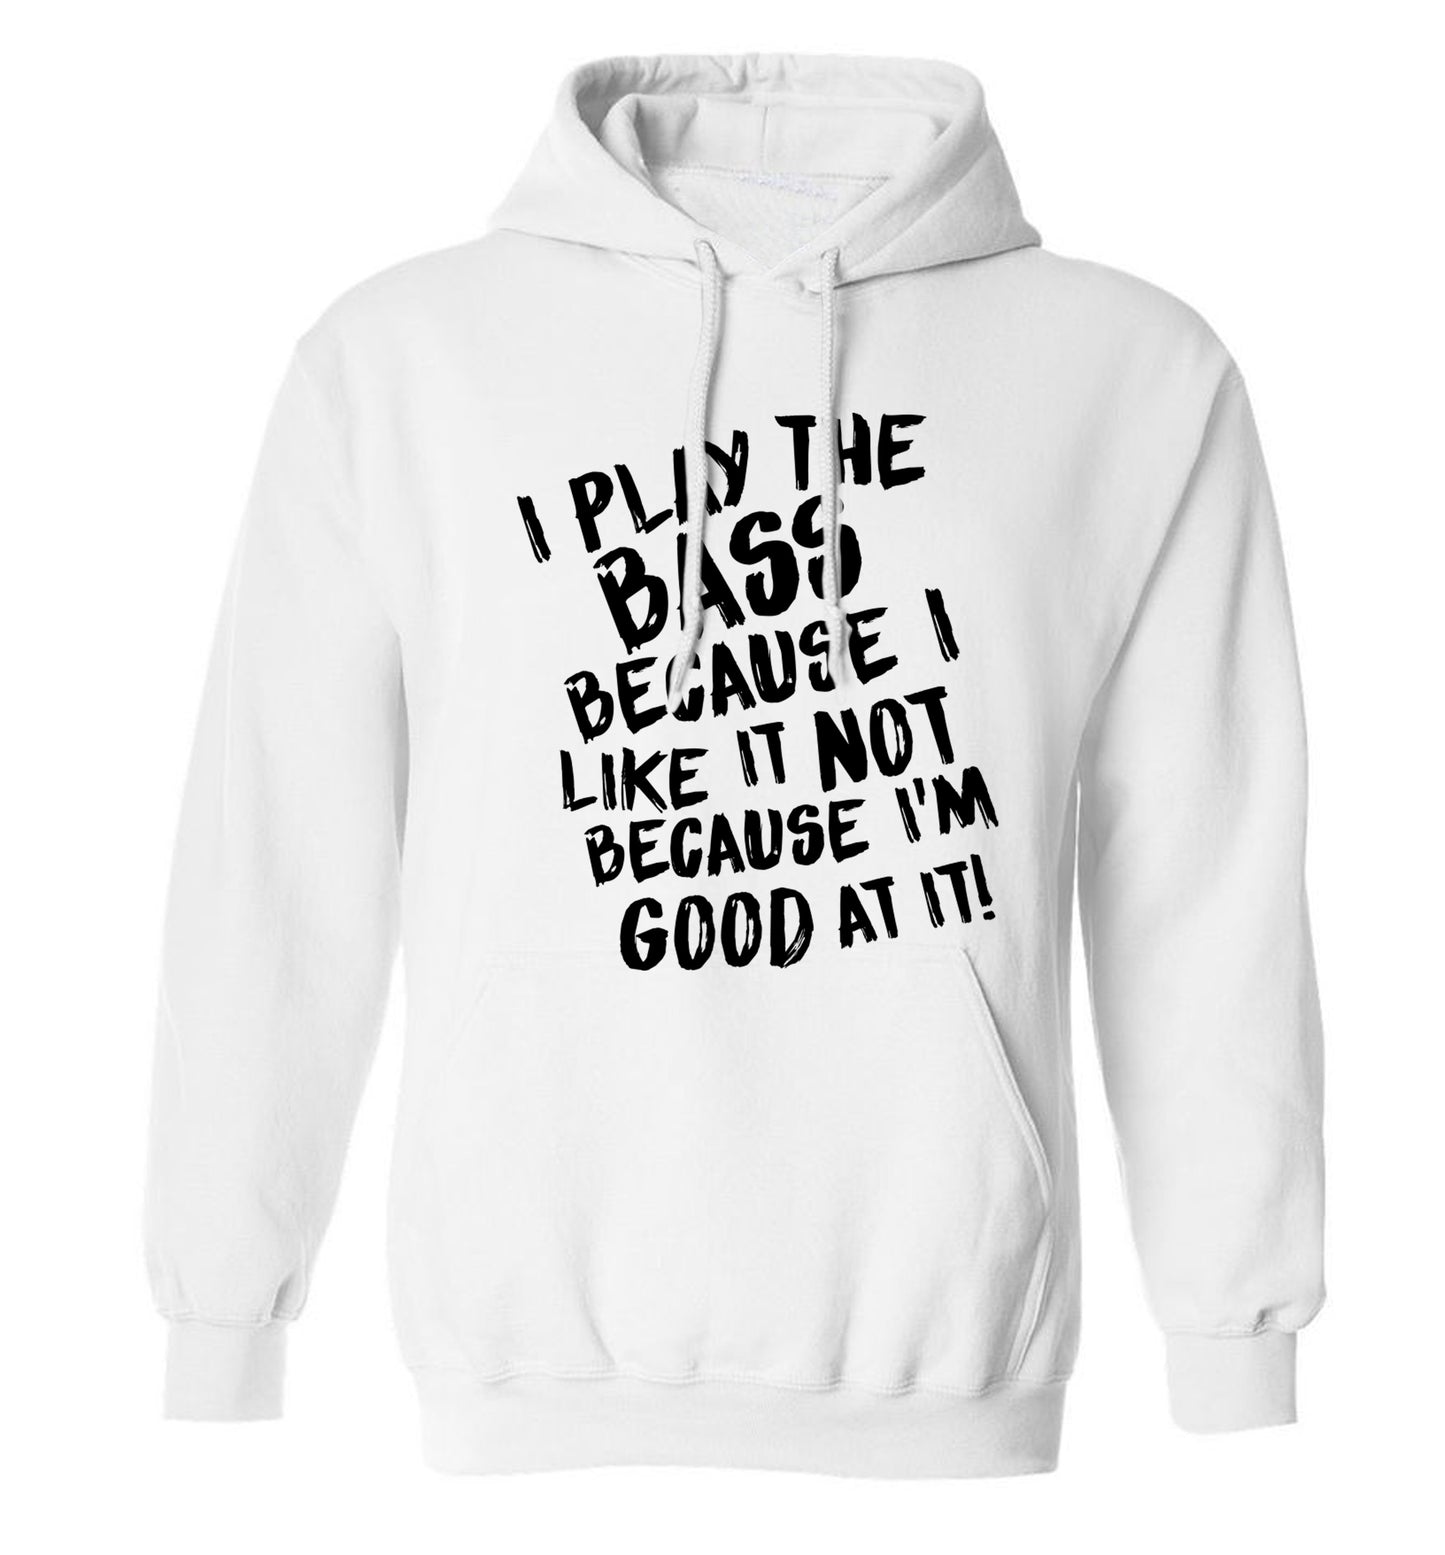 I play the bass because I like it not because I'm good at it adults unisex white hoodie 2XL